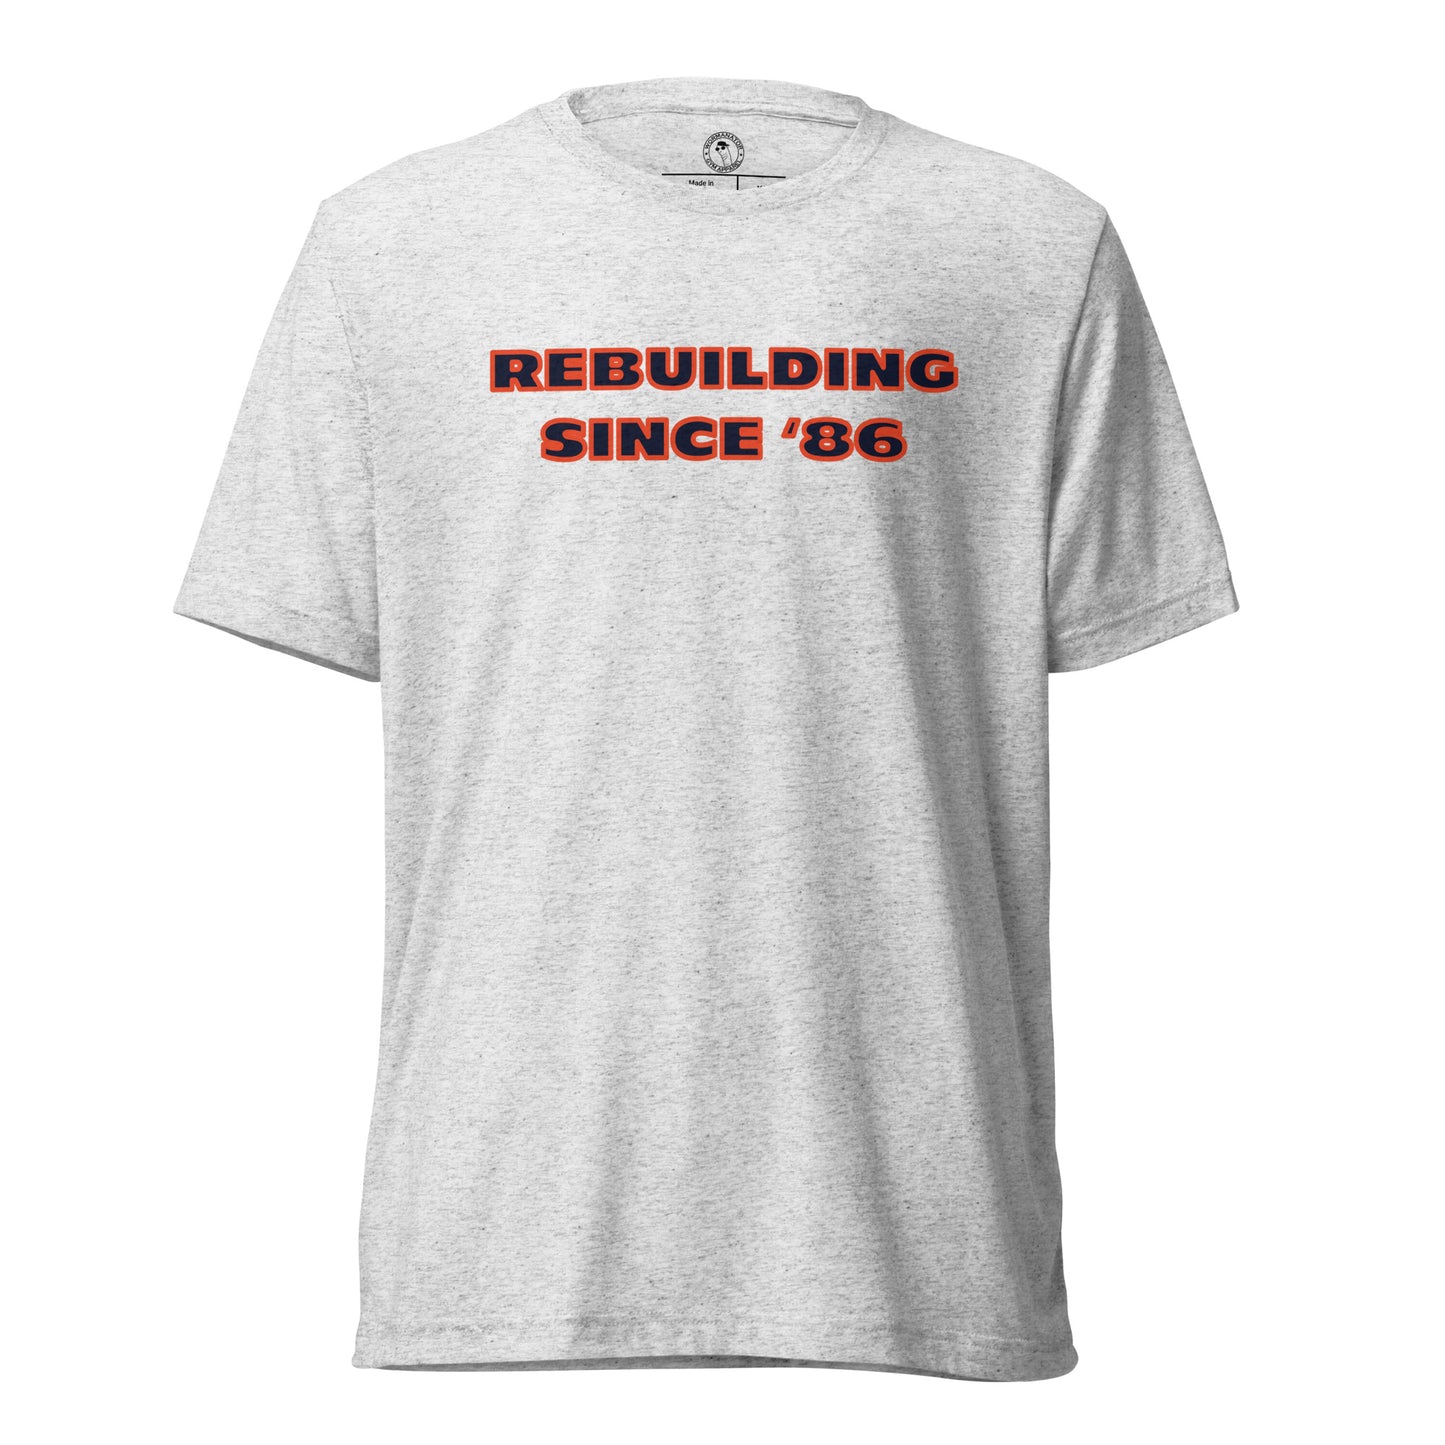 Chicago Bears Rebuilding Since 1986 Shirt in White Fleck Triblend